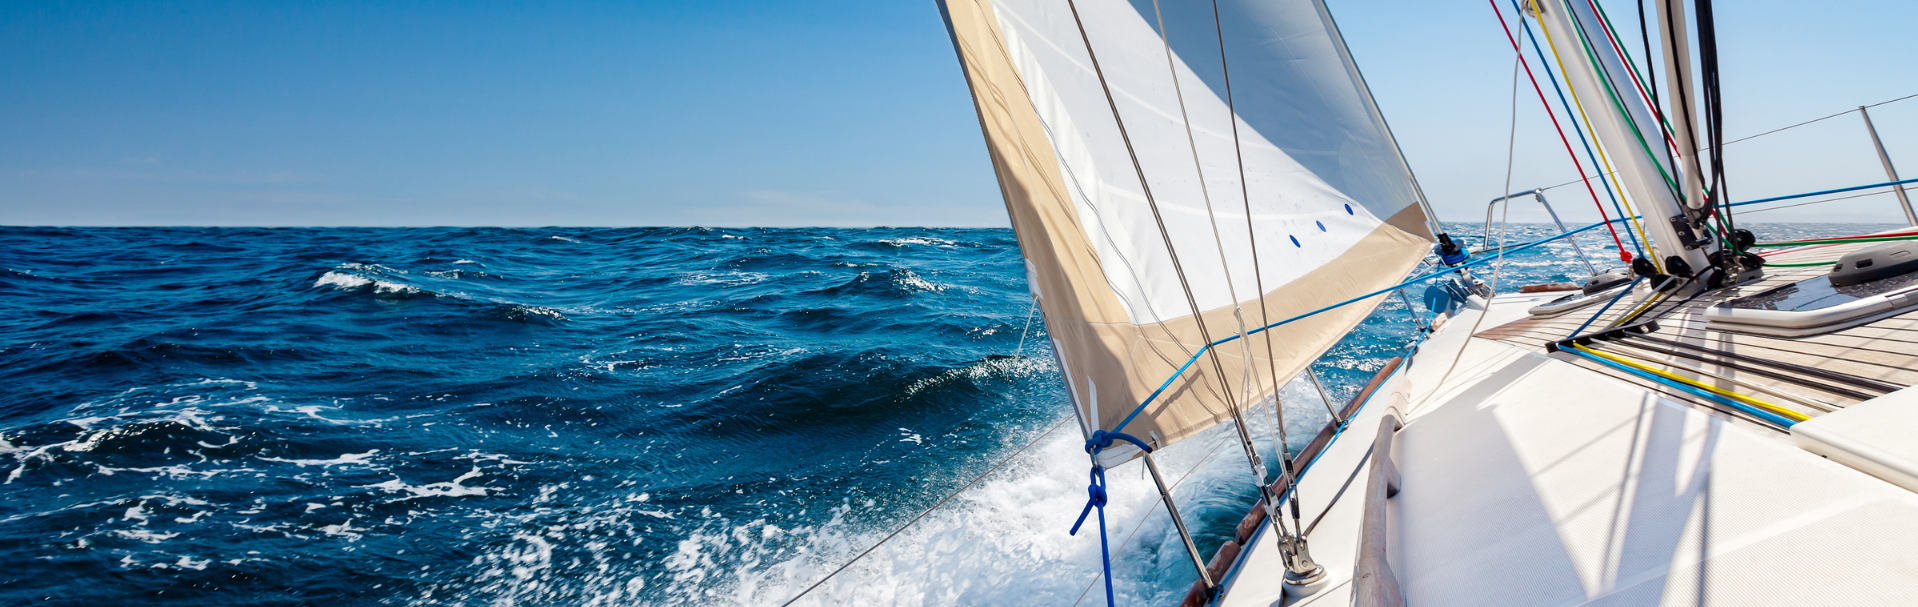 A Guide to Perfect Wind Conditions For A Sailing Vacation In Croatia